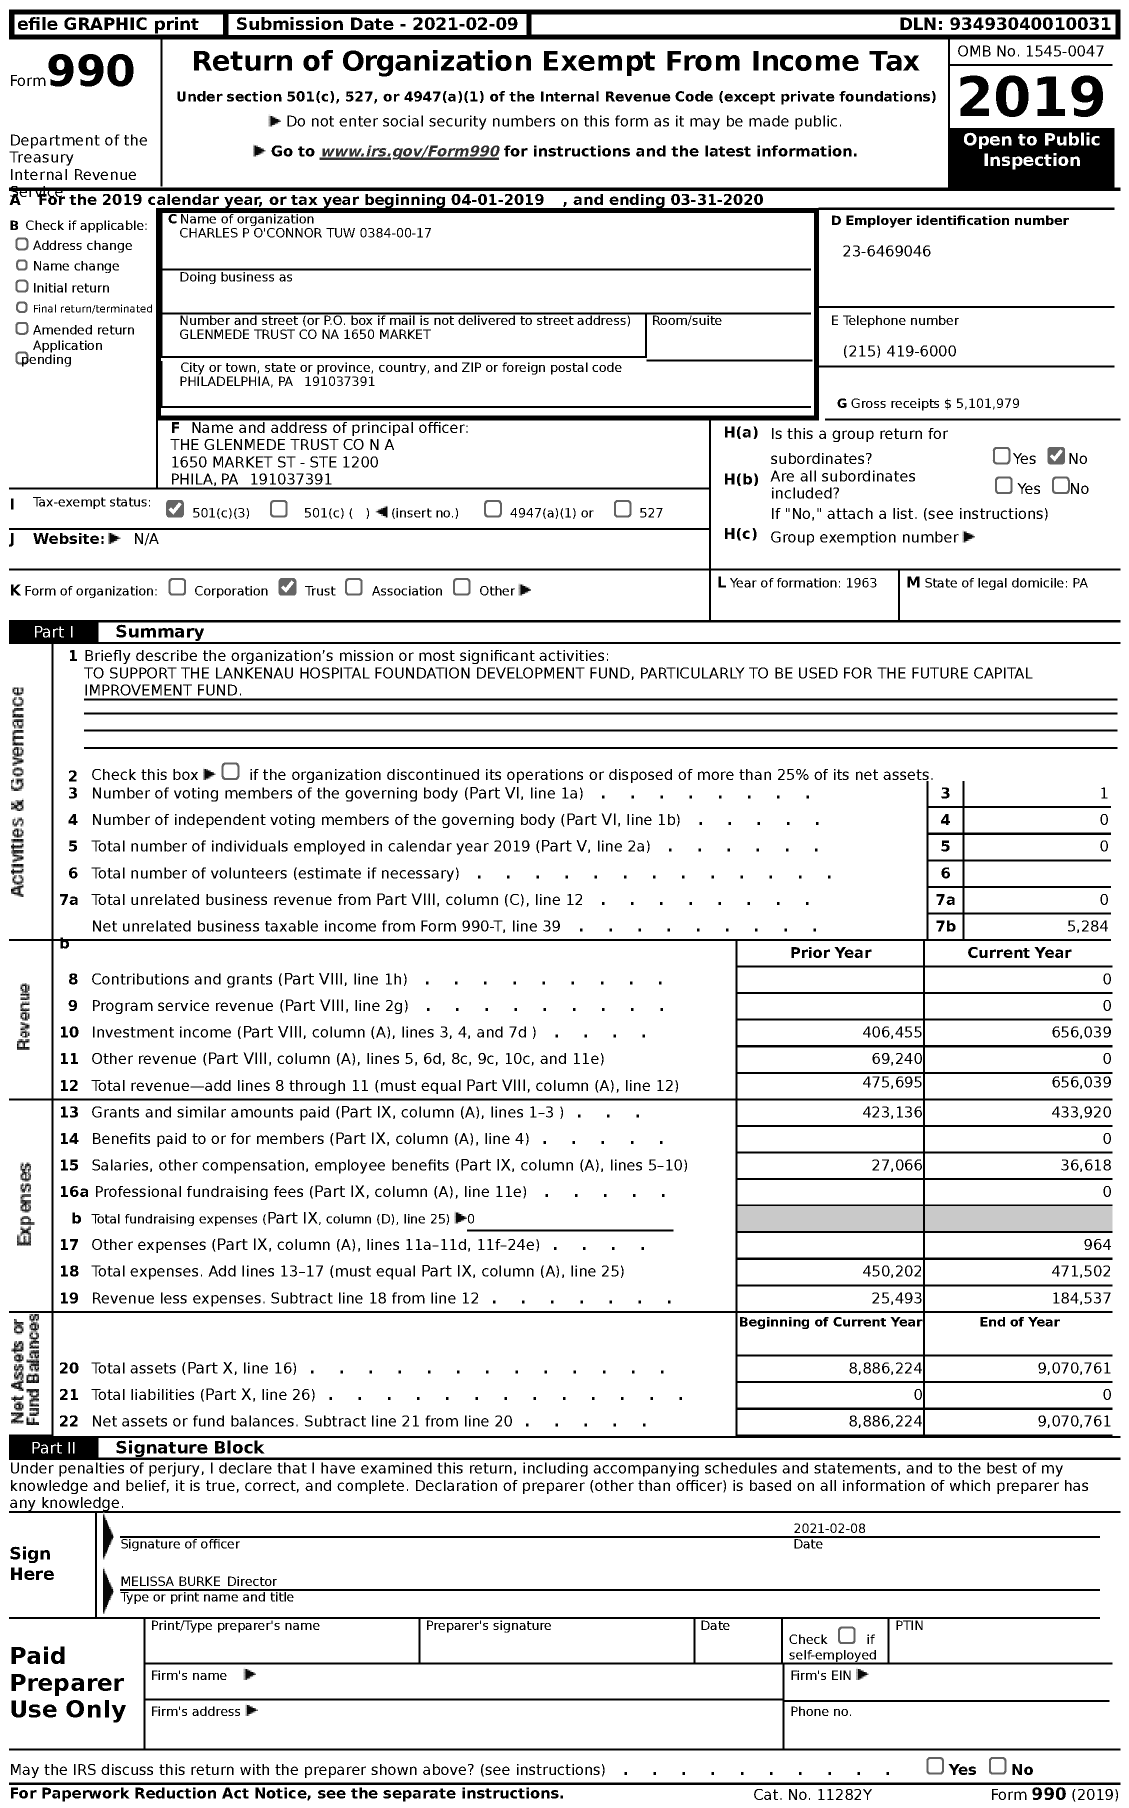 Image of first page of 2019 Form 990 for Charles P O'Connor Tuw 0384-00-17